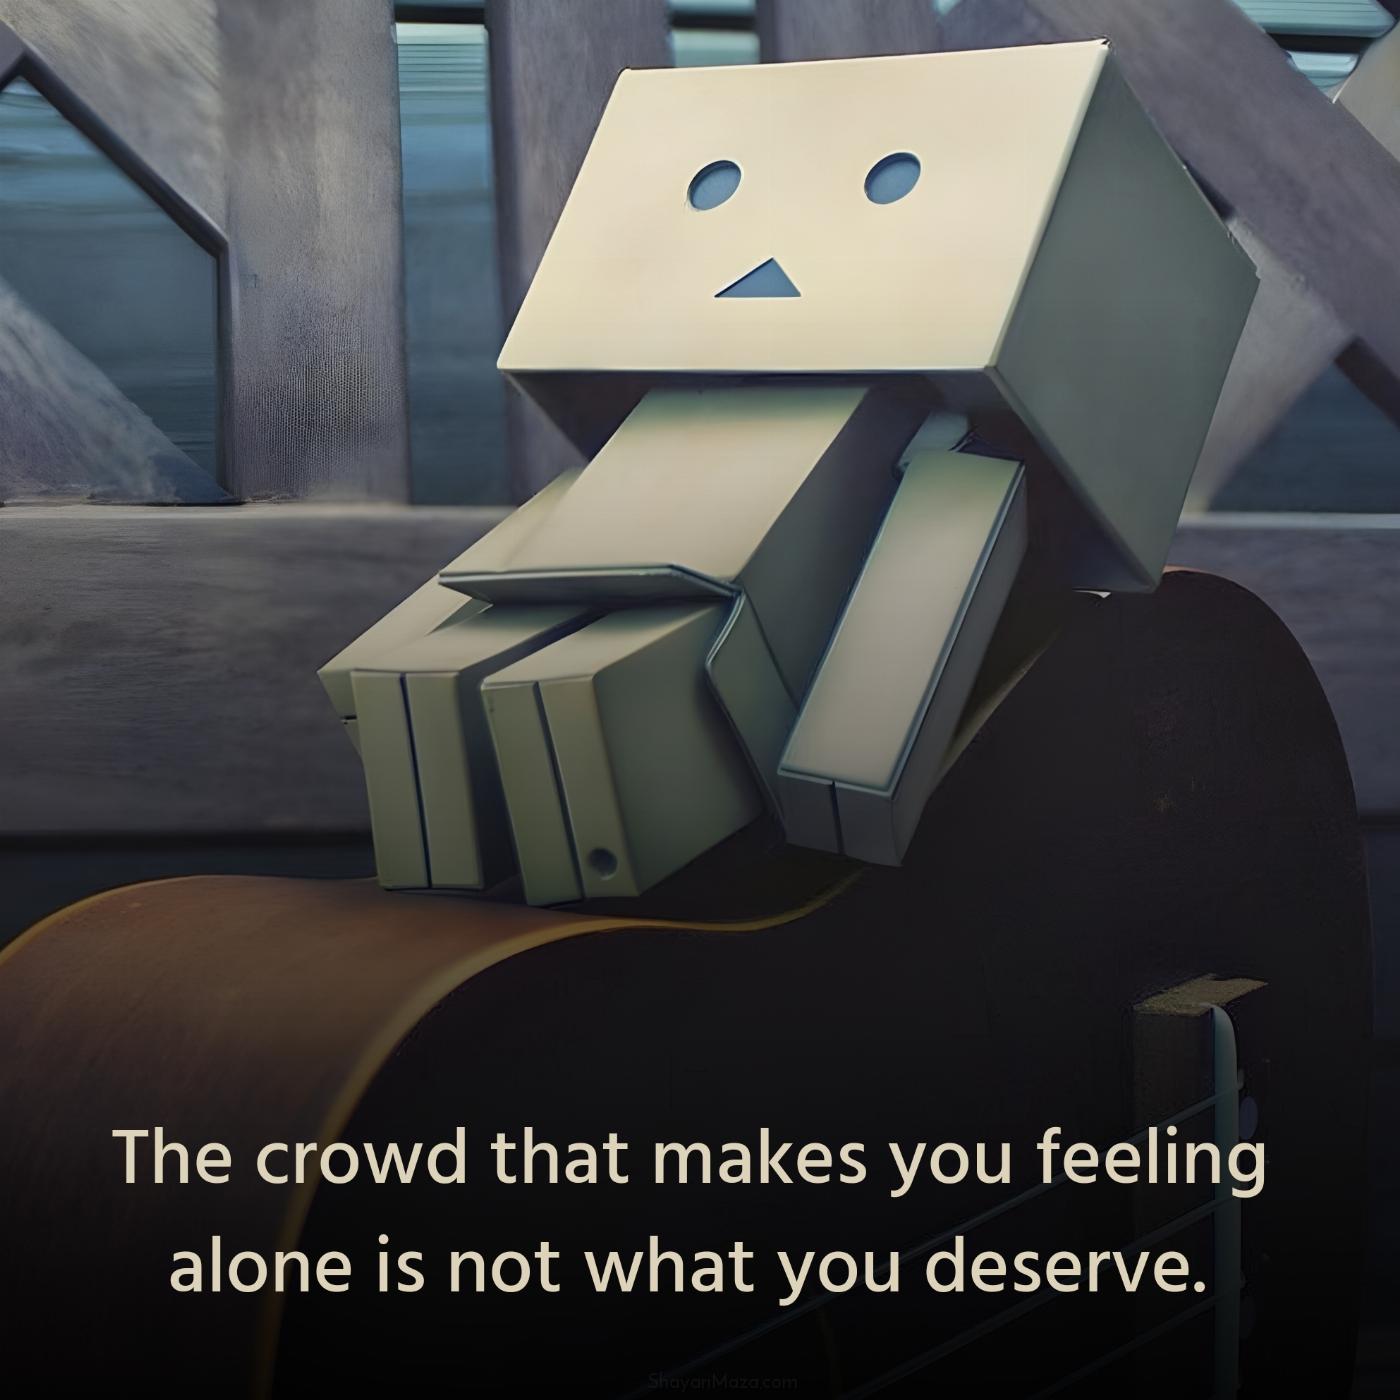 The crowd that makes you feeling alone is not what you deserve